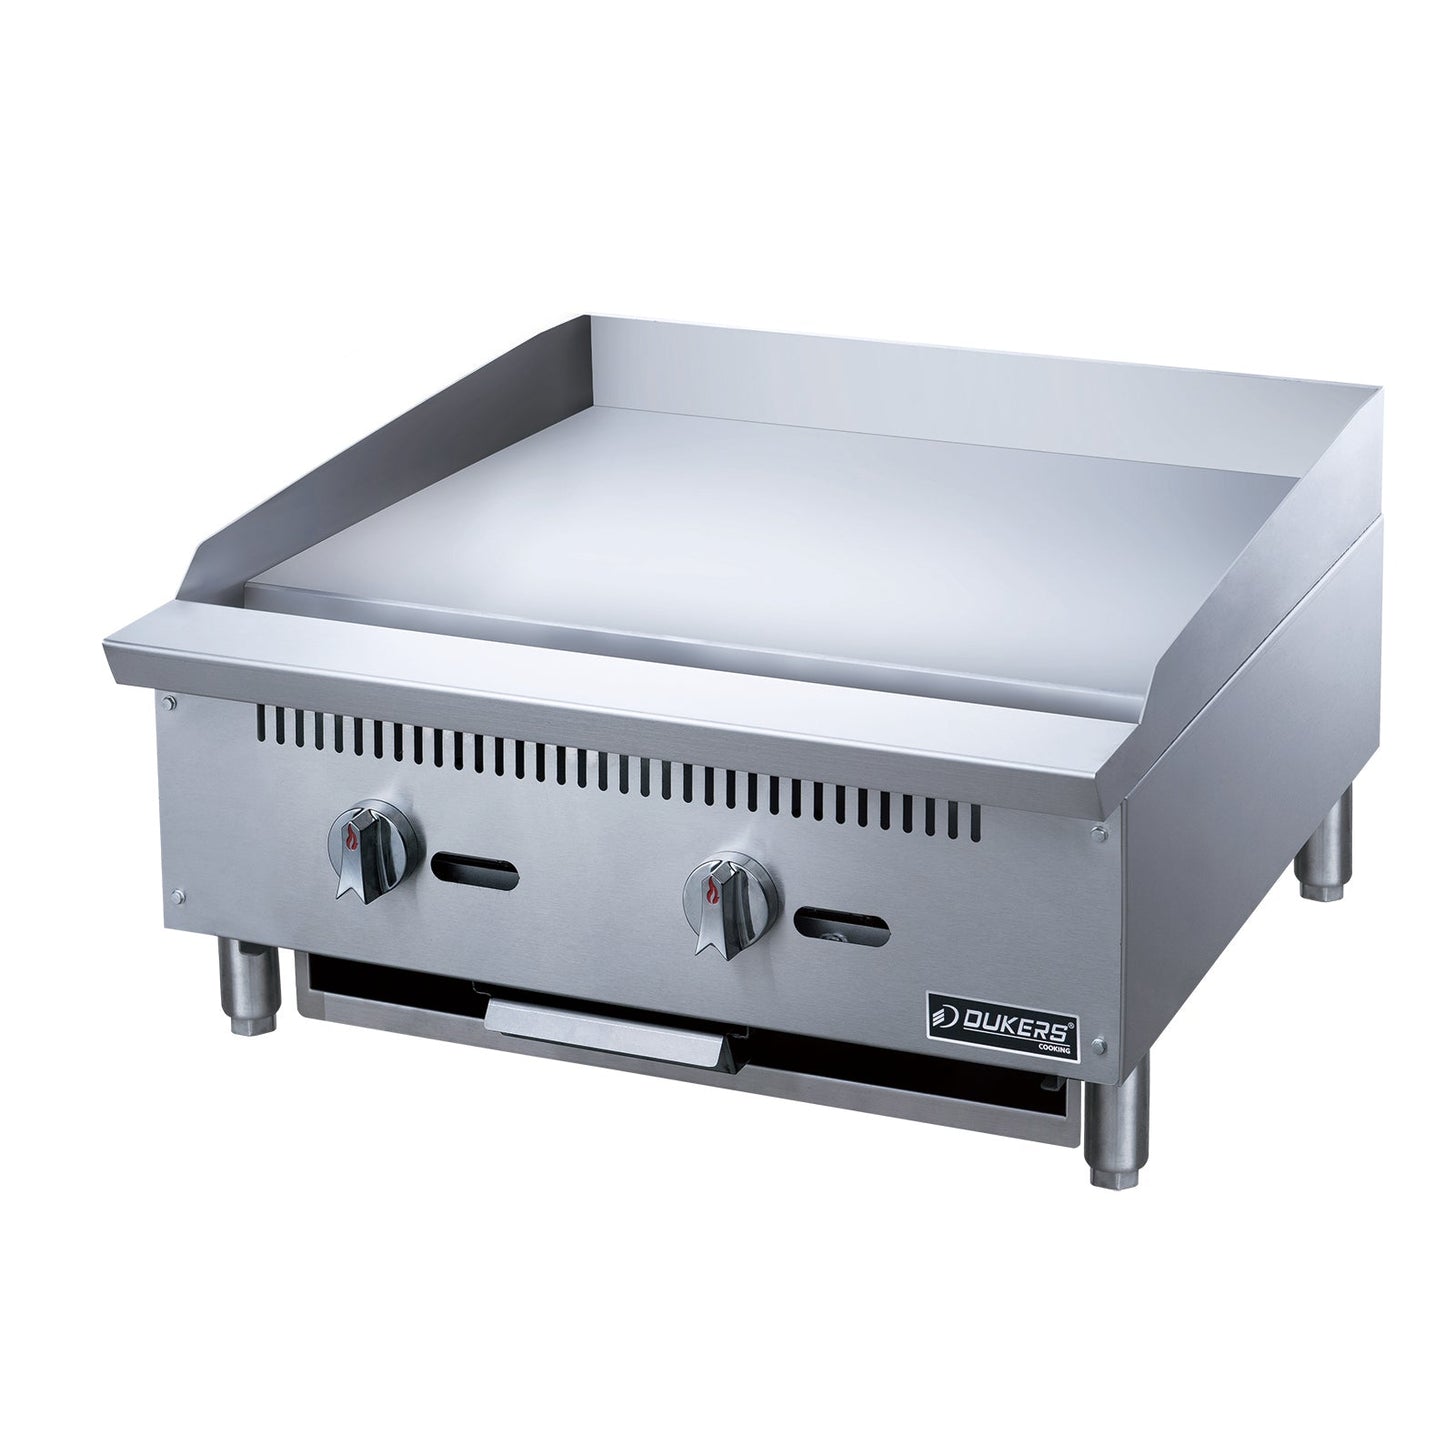 Dukers DCGMA24 24 inch Countertop Griddle